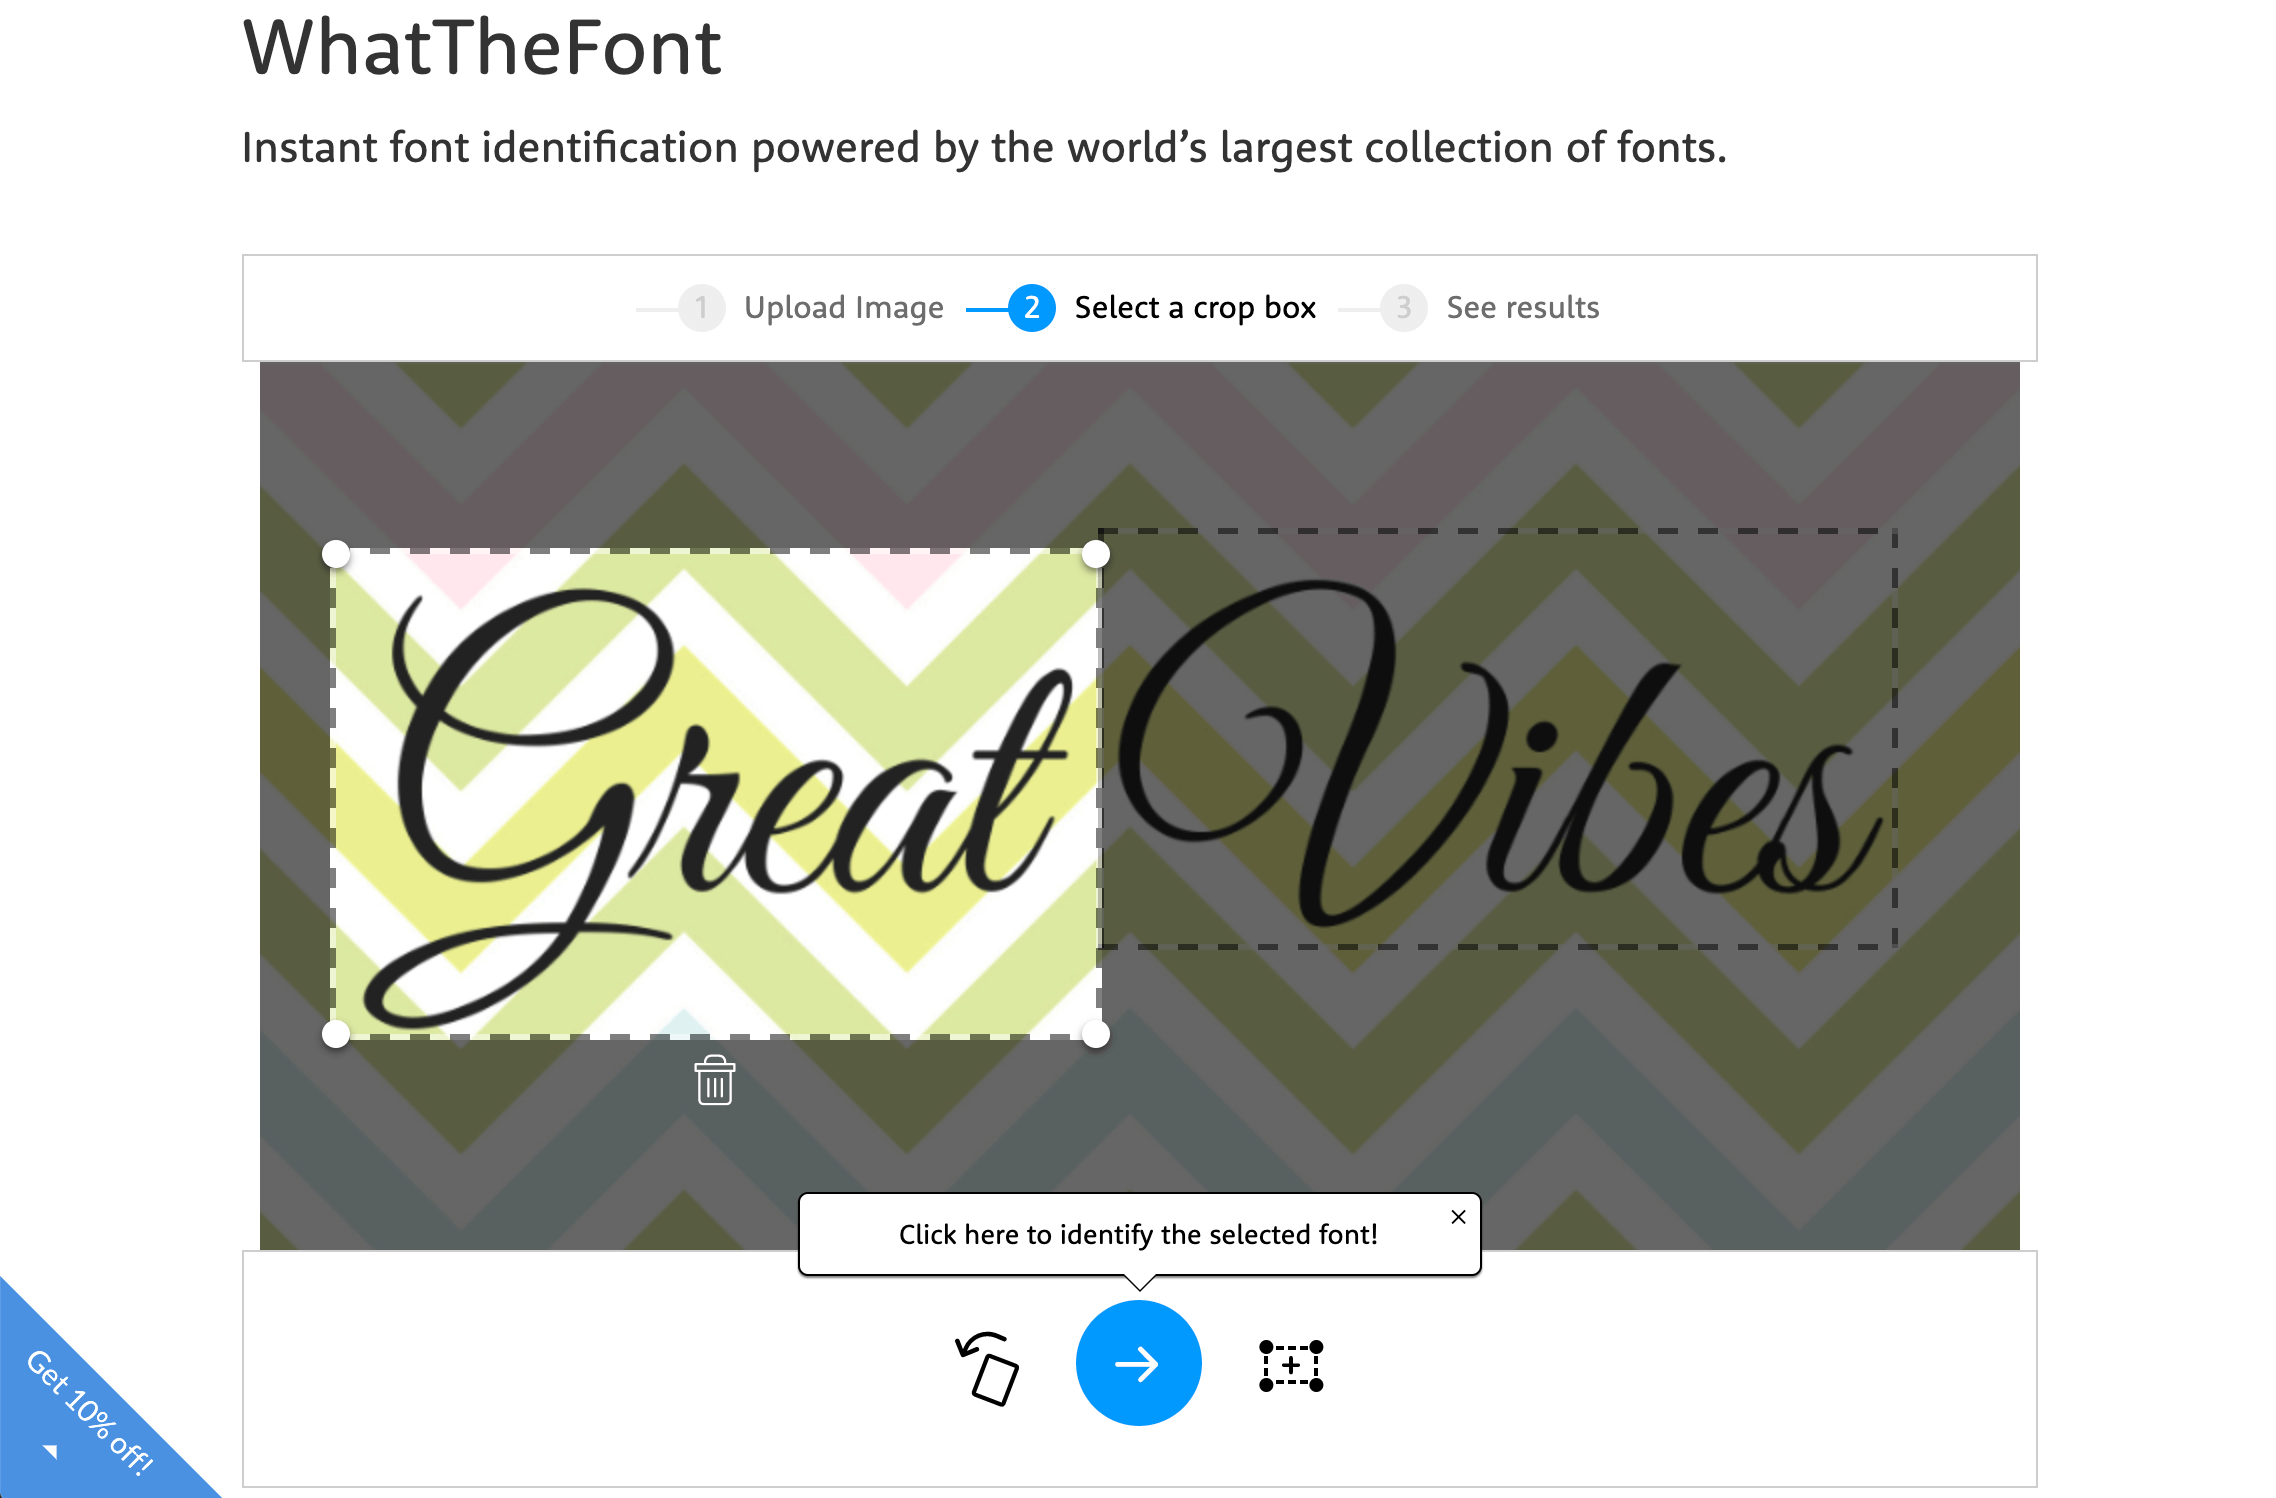 Selecting text from an image in WhatTheFont.